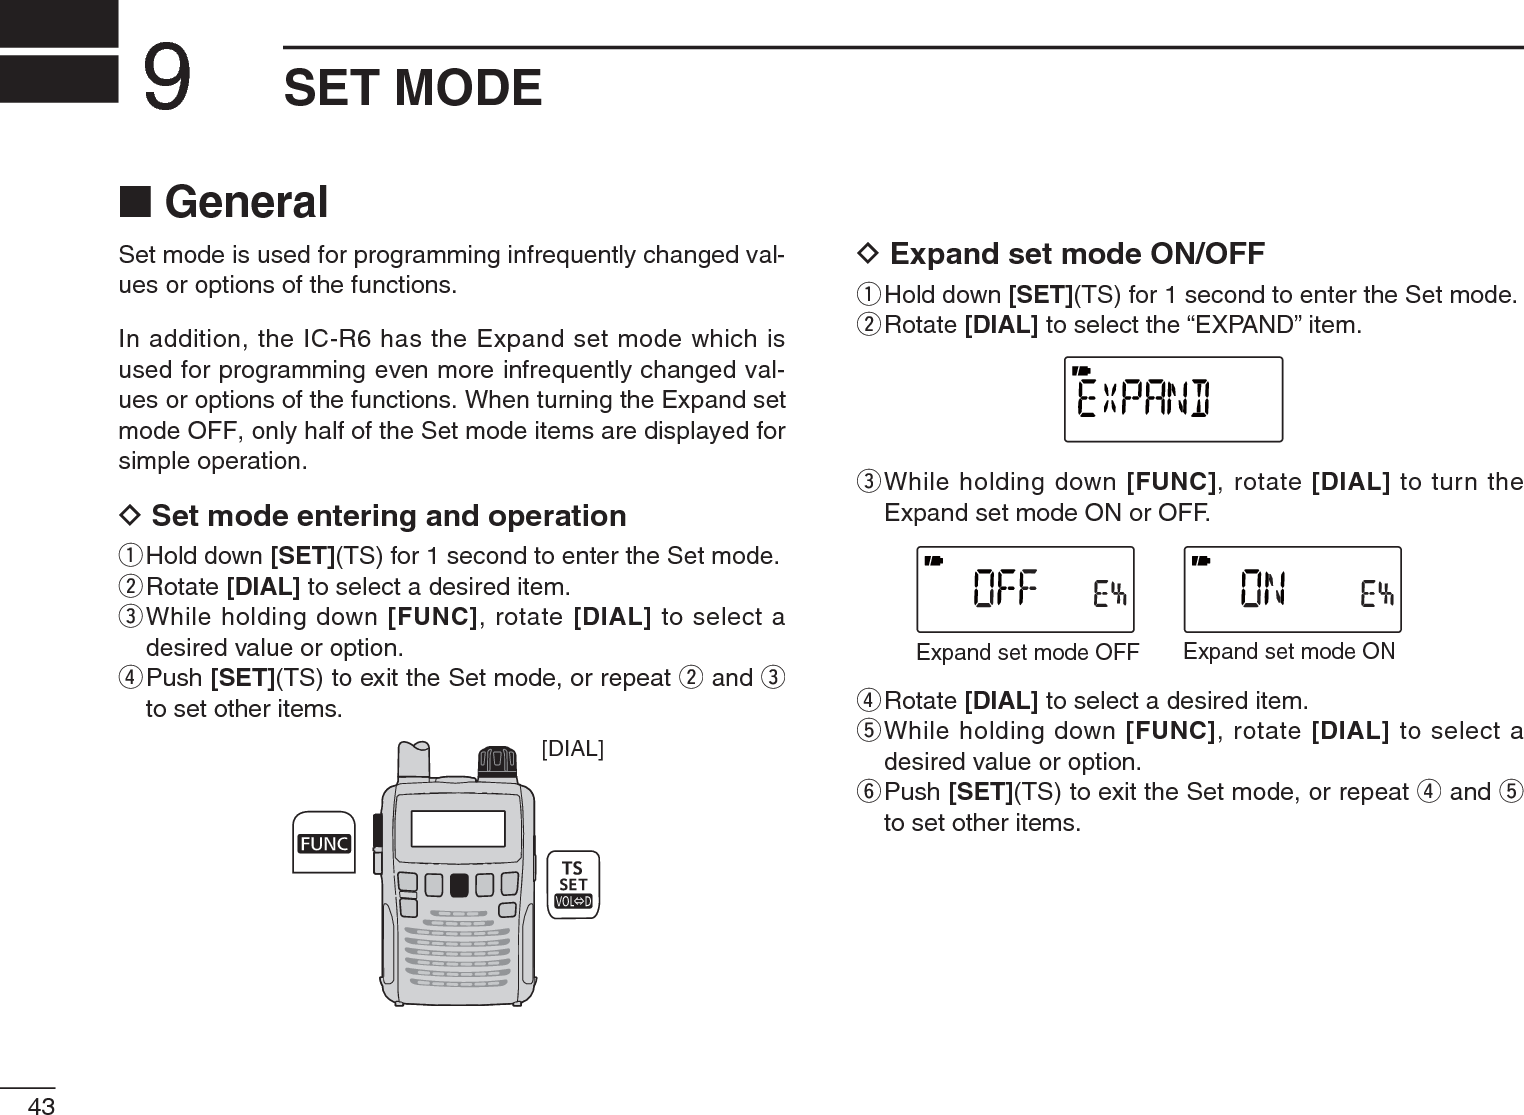 43SET MODE9N GeneralSet mode is used for programming infrequently changed val-ues or options of the functions.In addition, the IC-R6 has the Expand set mode which is used for programming even more infrequently changed val-ues or options of the functions. When turning the Expand set mode OFF, only half of the Set mode items are displayed for simple operation.D Set mode entering and operationqHold down [SET](TS) for 1 second to enter the Set mode.wRotate [DIAL] to select a desired item.e  While holding down [FUNC], rotate [DIAL] to select a desired value or option.r  Push [SET](TS) to exit the Set mode, or repeat w and eto set other items.[DIAL]D Expand set mode ON/OFFqHold down [SET](TS) for 1 second to enter the Set mode.wRotate [DIAL] to select the “EXPAND” item.e  While holding down [FUNC], rotate [DIAL] to turn the Expand set mode ON or OFF.Expand set mode OFF Expand set mode ONrRotate [DIAL] to select a desired item.t  While holding down [FUNC], rotate [DIAL] to select a desired value or option.y  Push [SET](TS) to exit the Set mode, or repeat r and tto set other items.